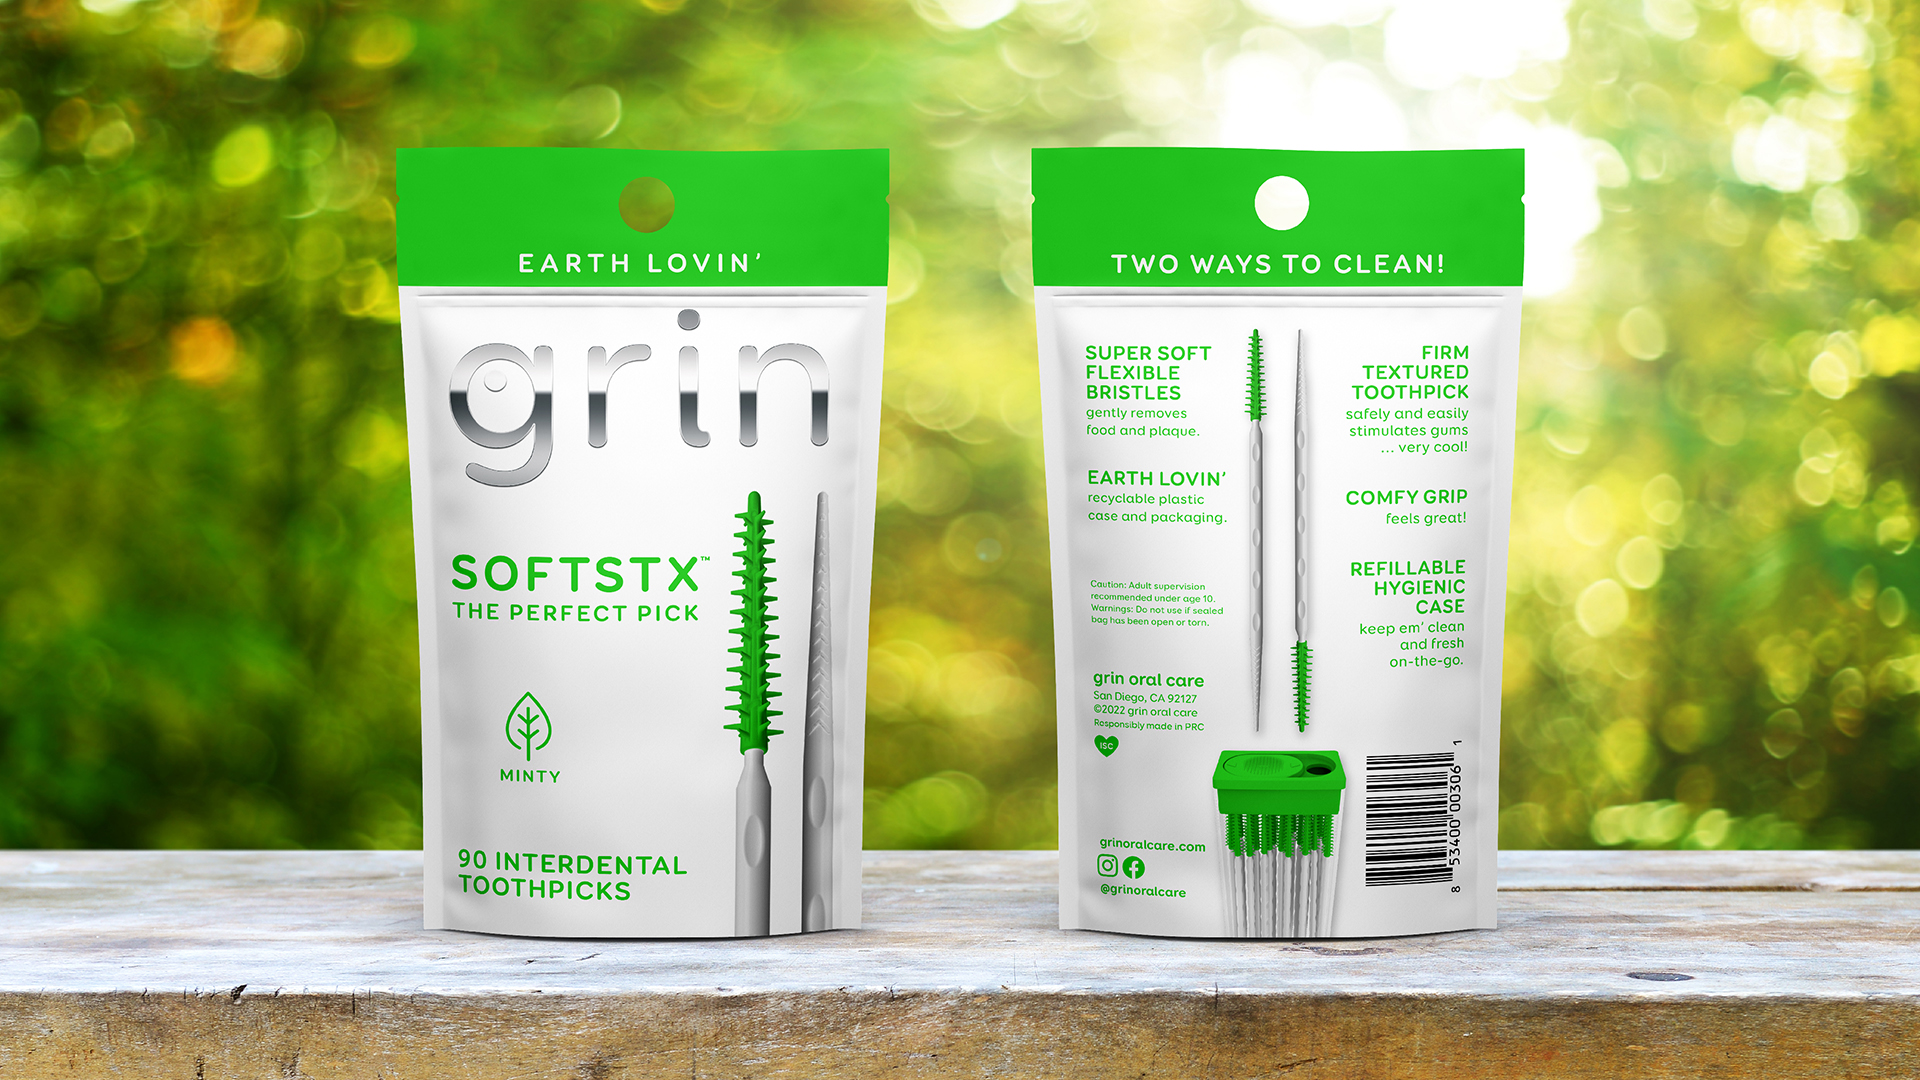 Grin Oral Care Minty Softstx Photography